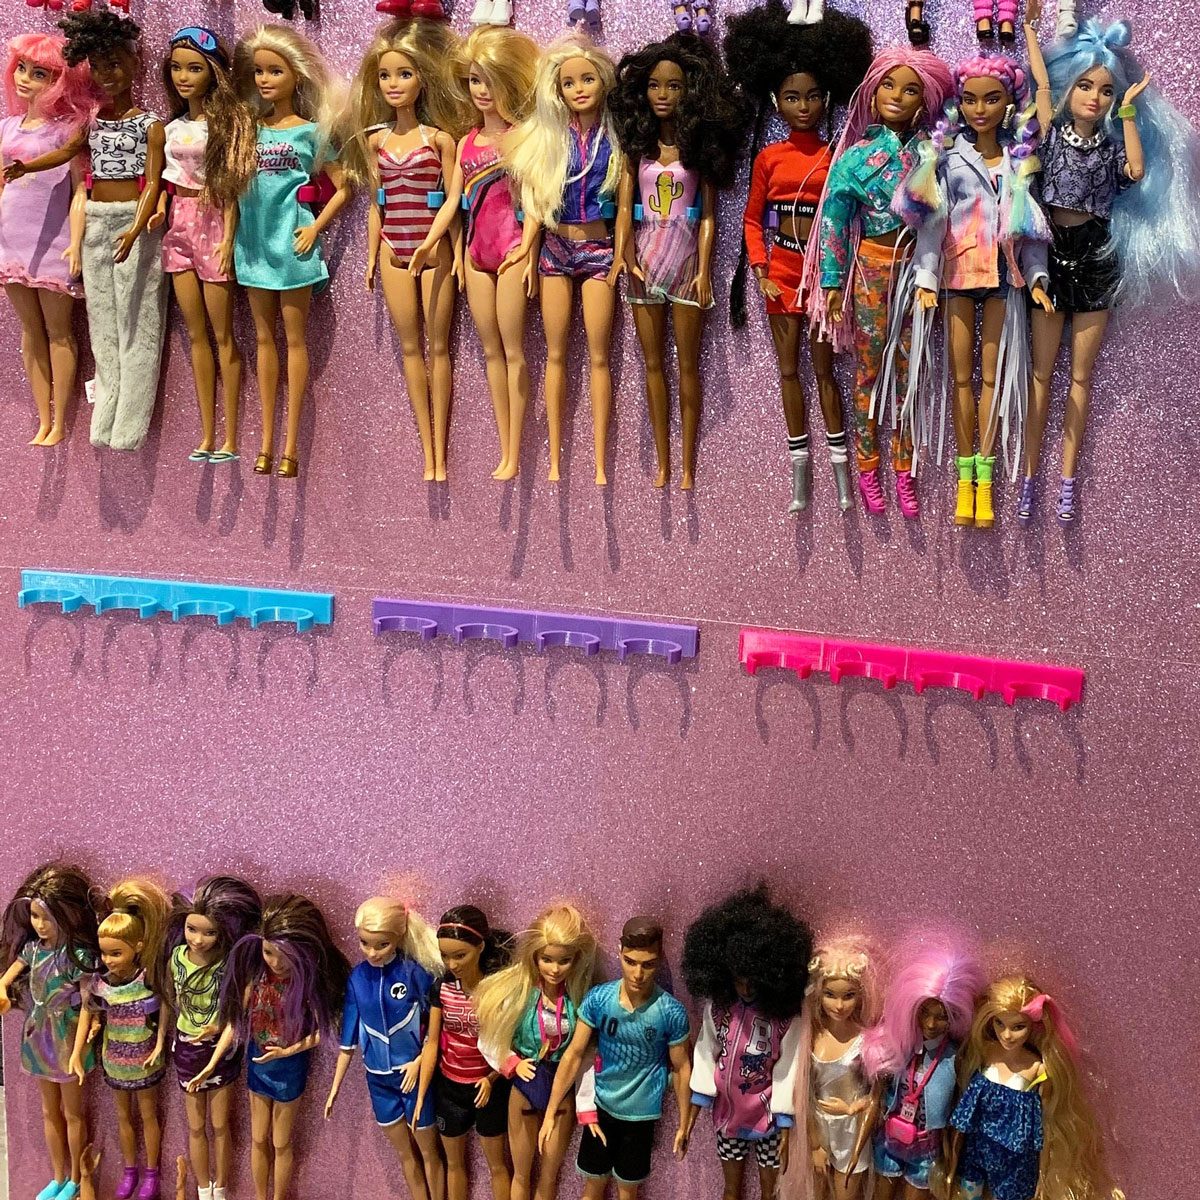 How To Store Barbie Stuff